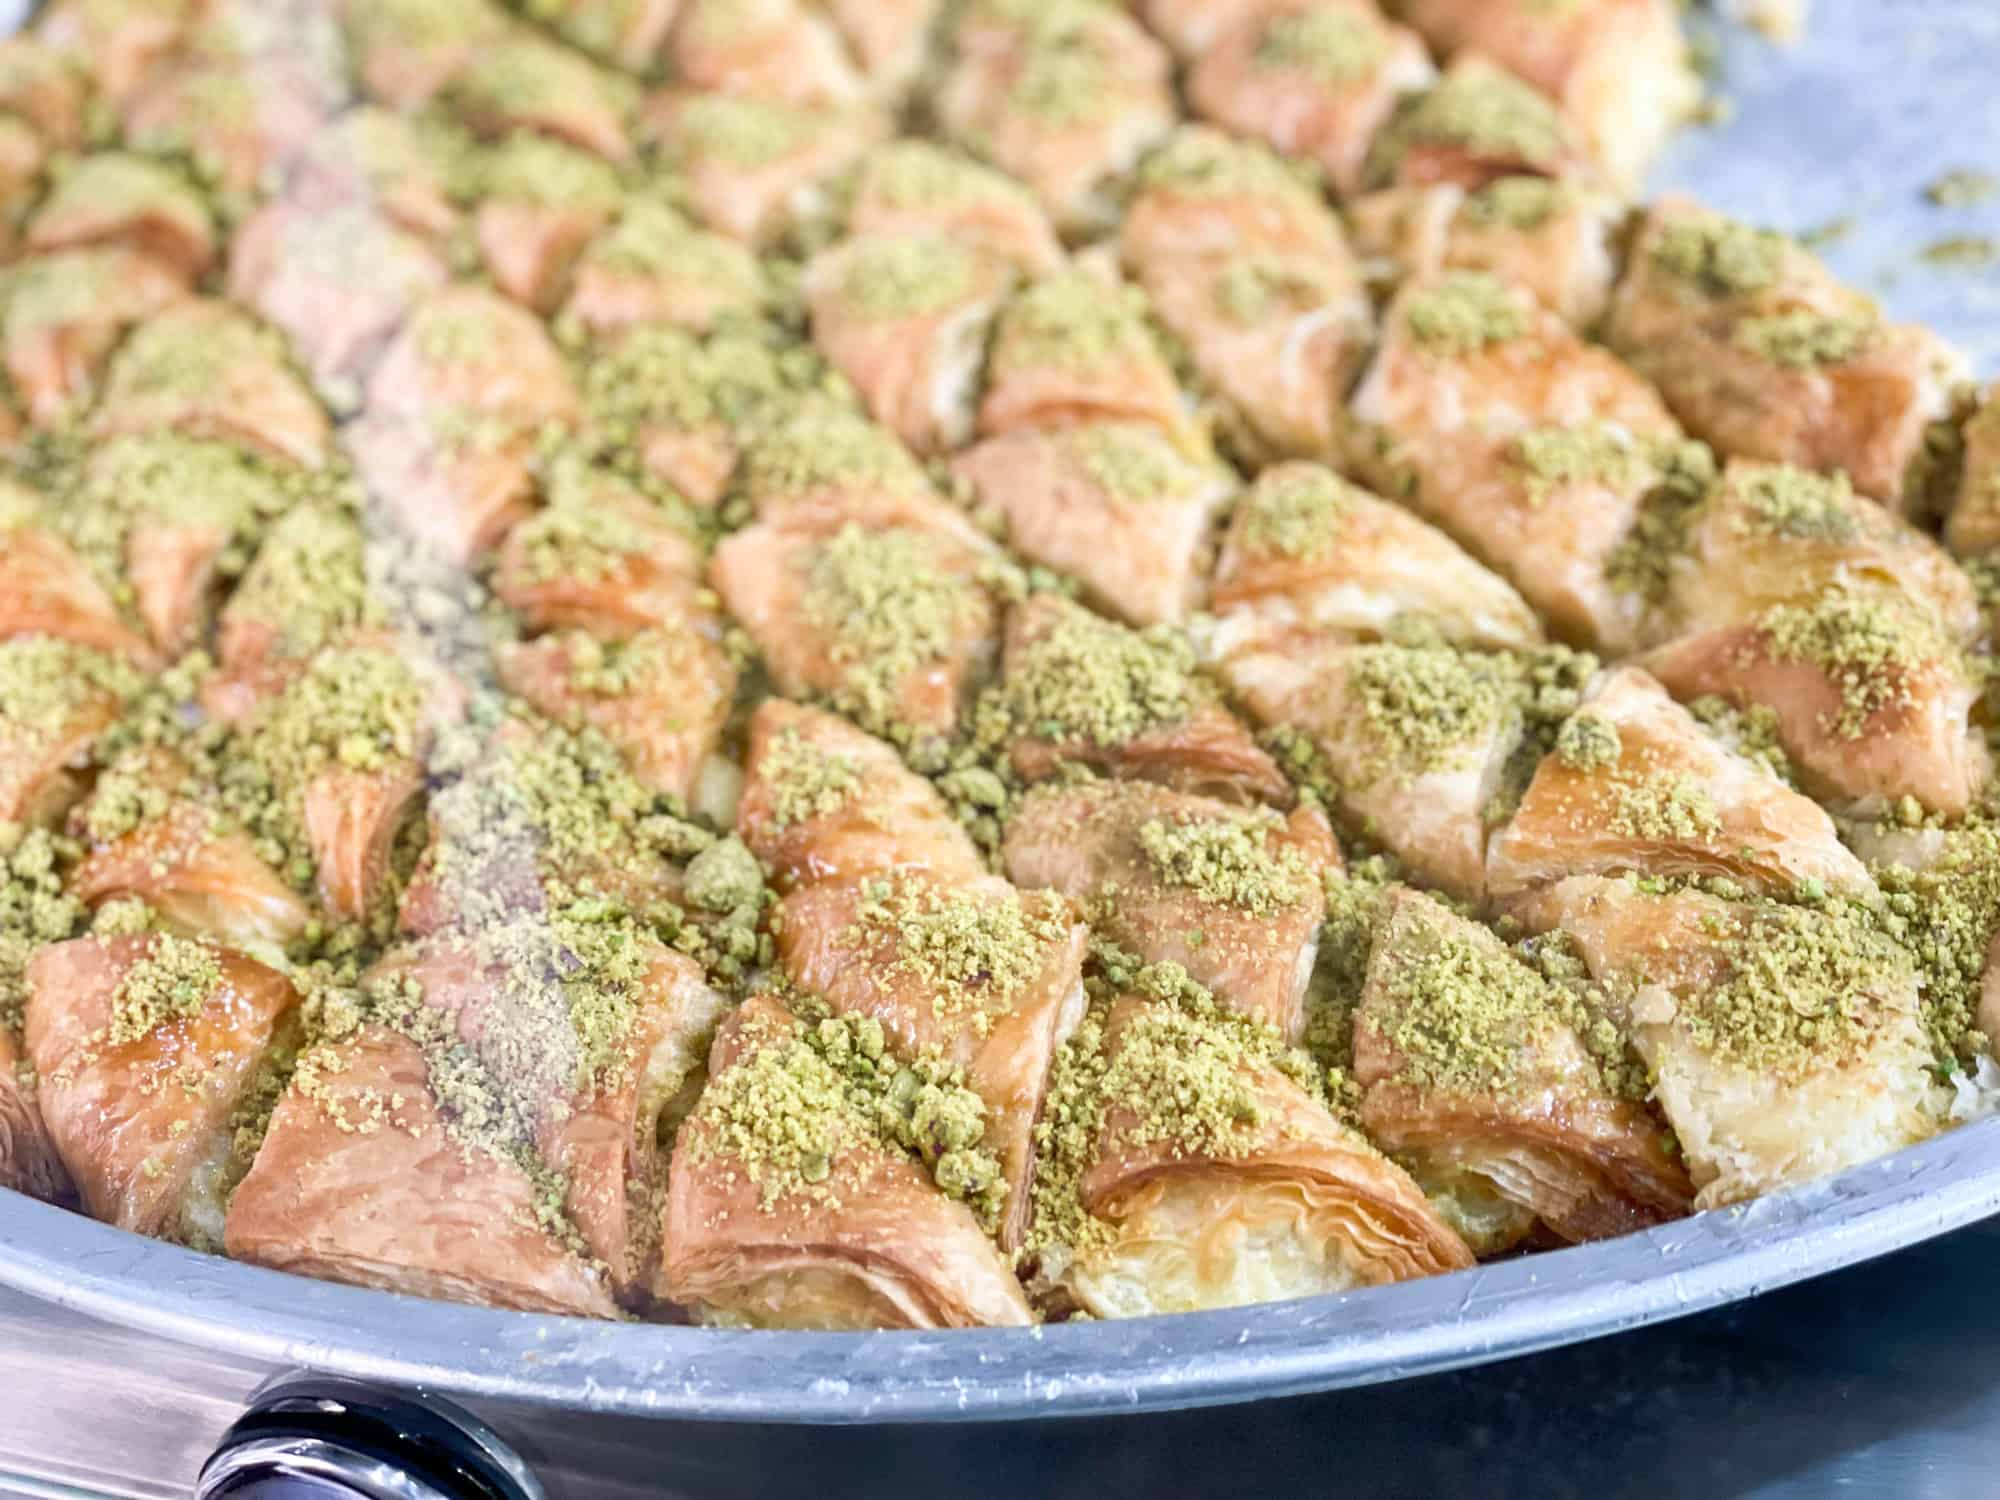 Jordan - Amman Old Town - knafeh like pastry with hot cheese and pistachio